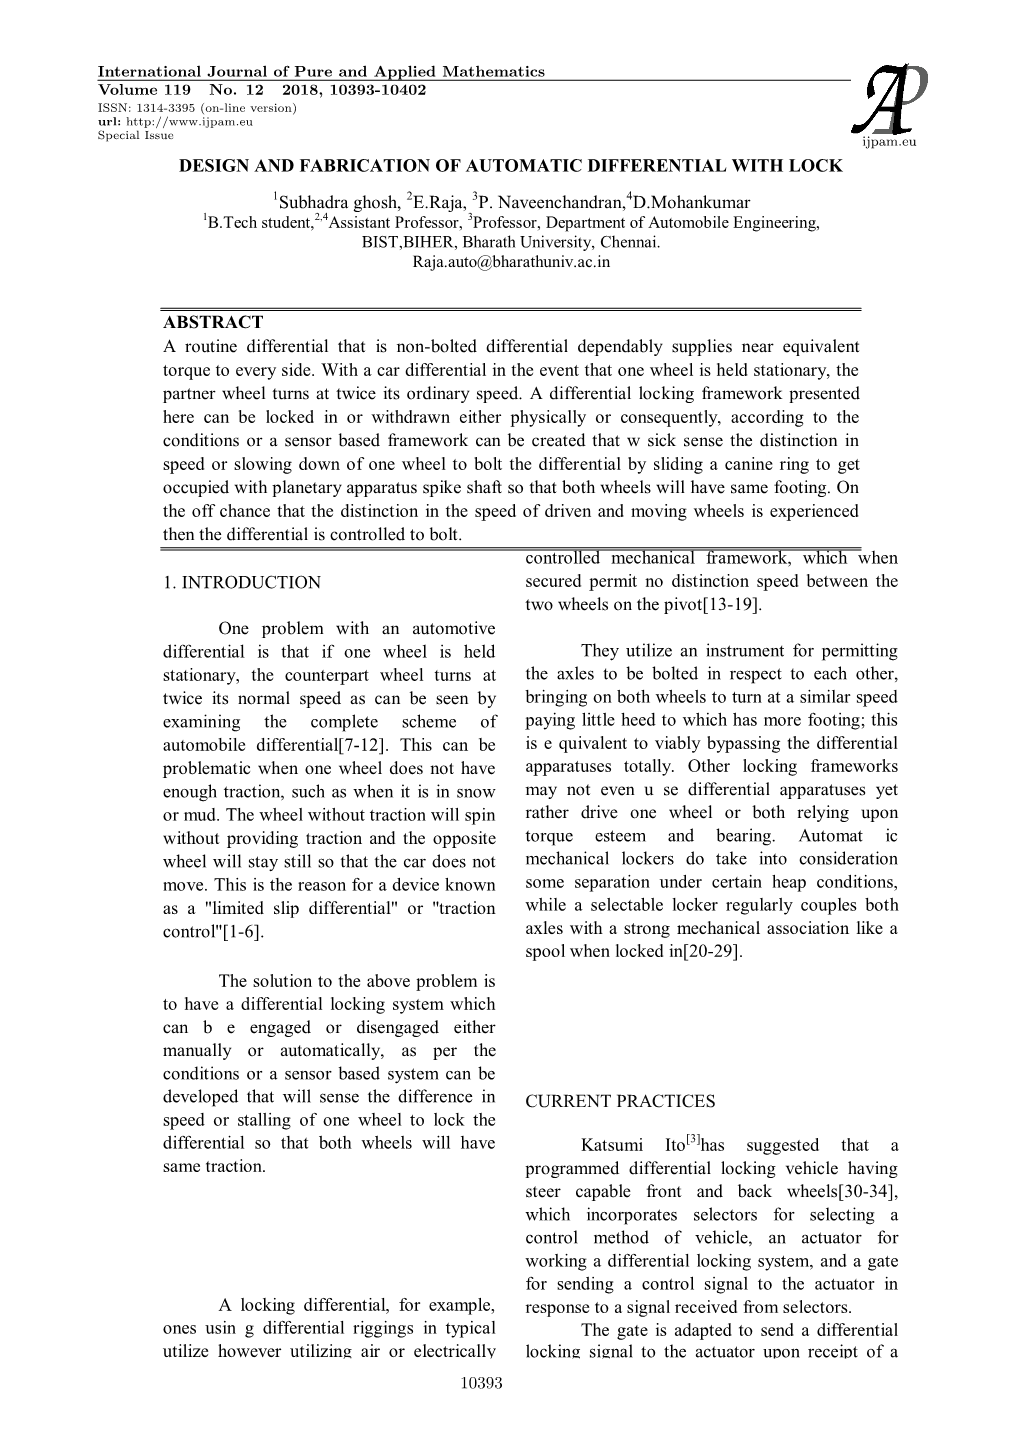 DESIGN and FABRICATION of AUTOMATIC DIFFERENTIAL with LOCK 1Subhadra Ghosh, 2E.Raja, 3P. Naveenchandran,4D.Mohankumar ABSTRACT A